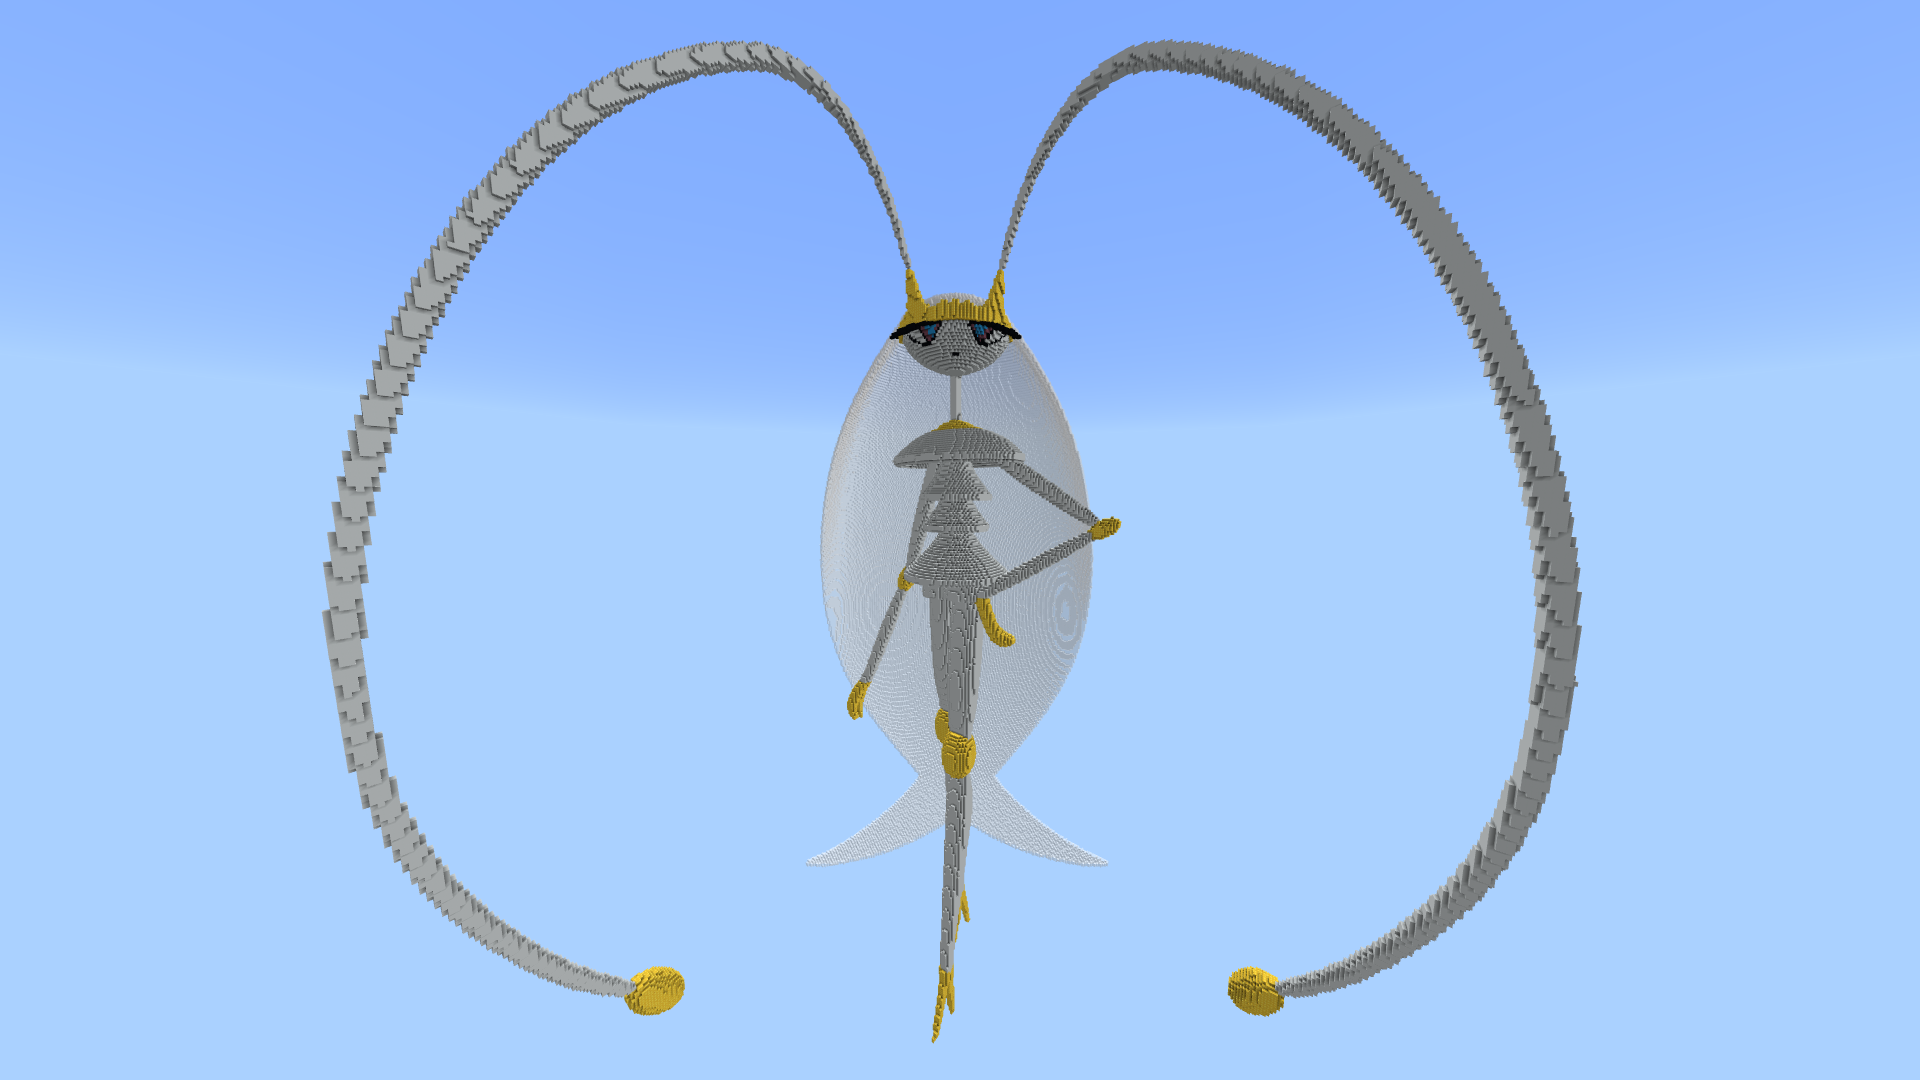 finished-my-3d-art-of-pheromosa-in-minecraft-v0-mu5usaihes8a1